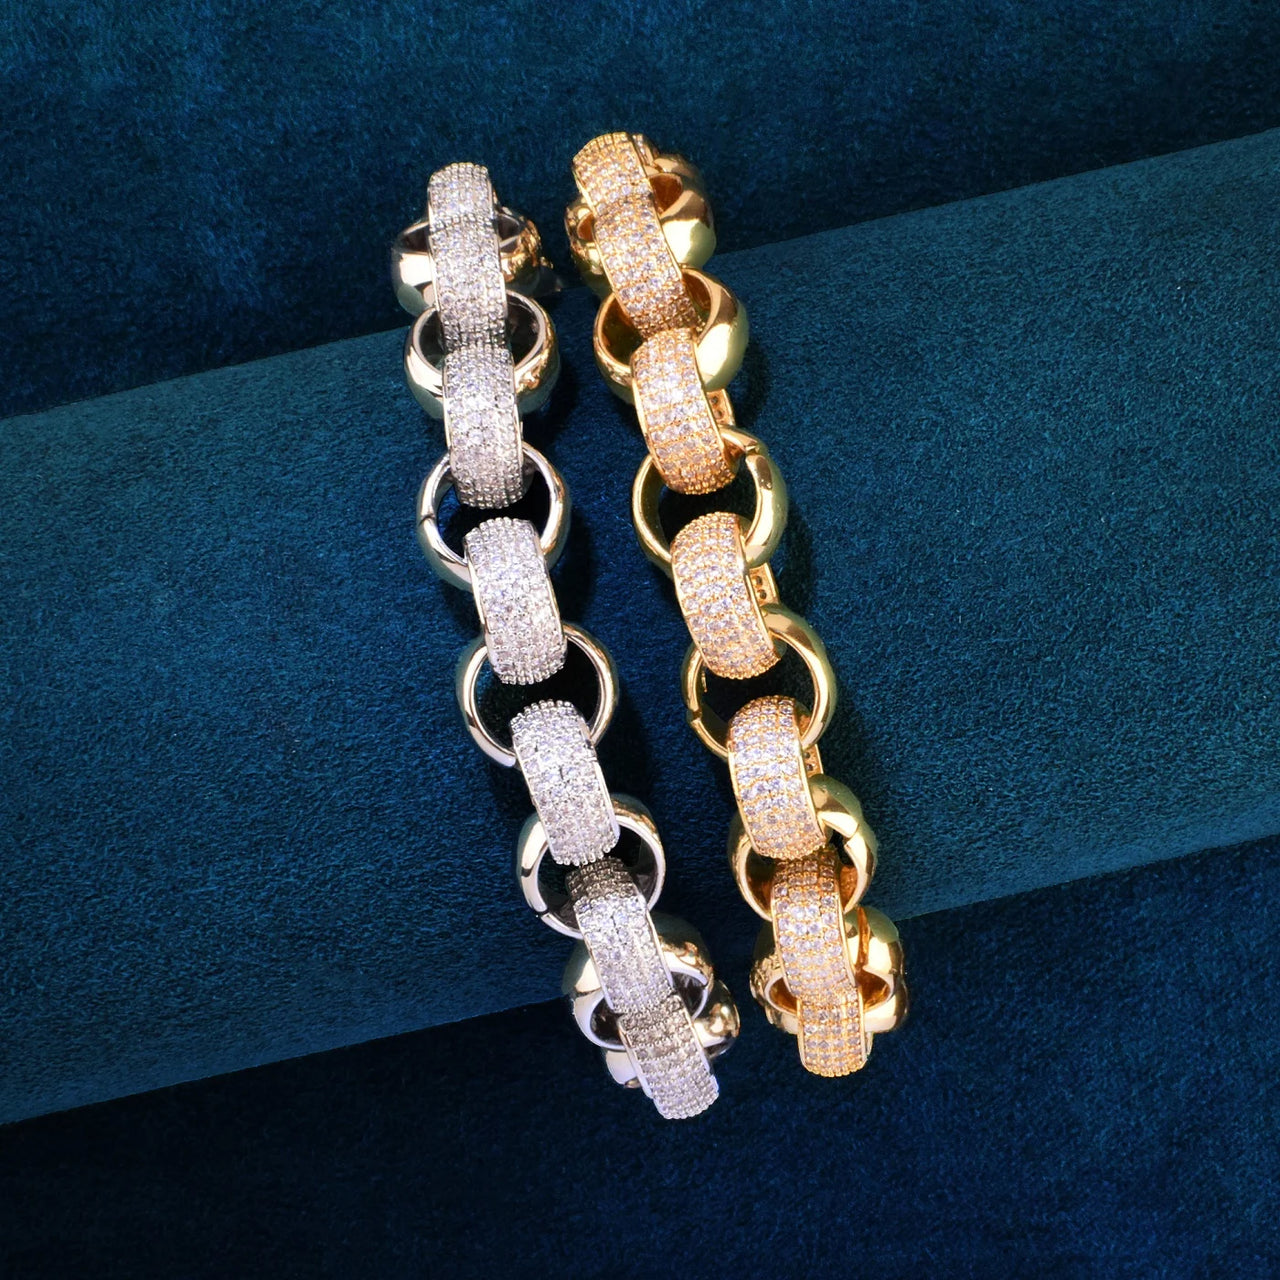 10mm Small Rolo Link Bracelet - Different Drips